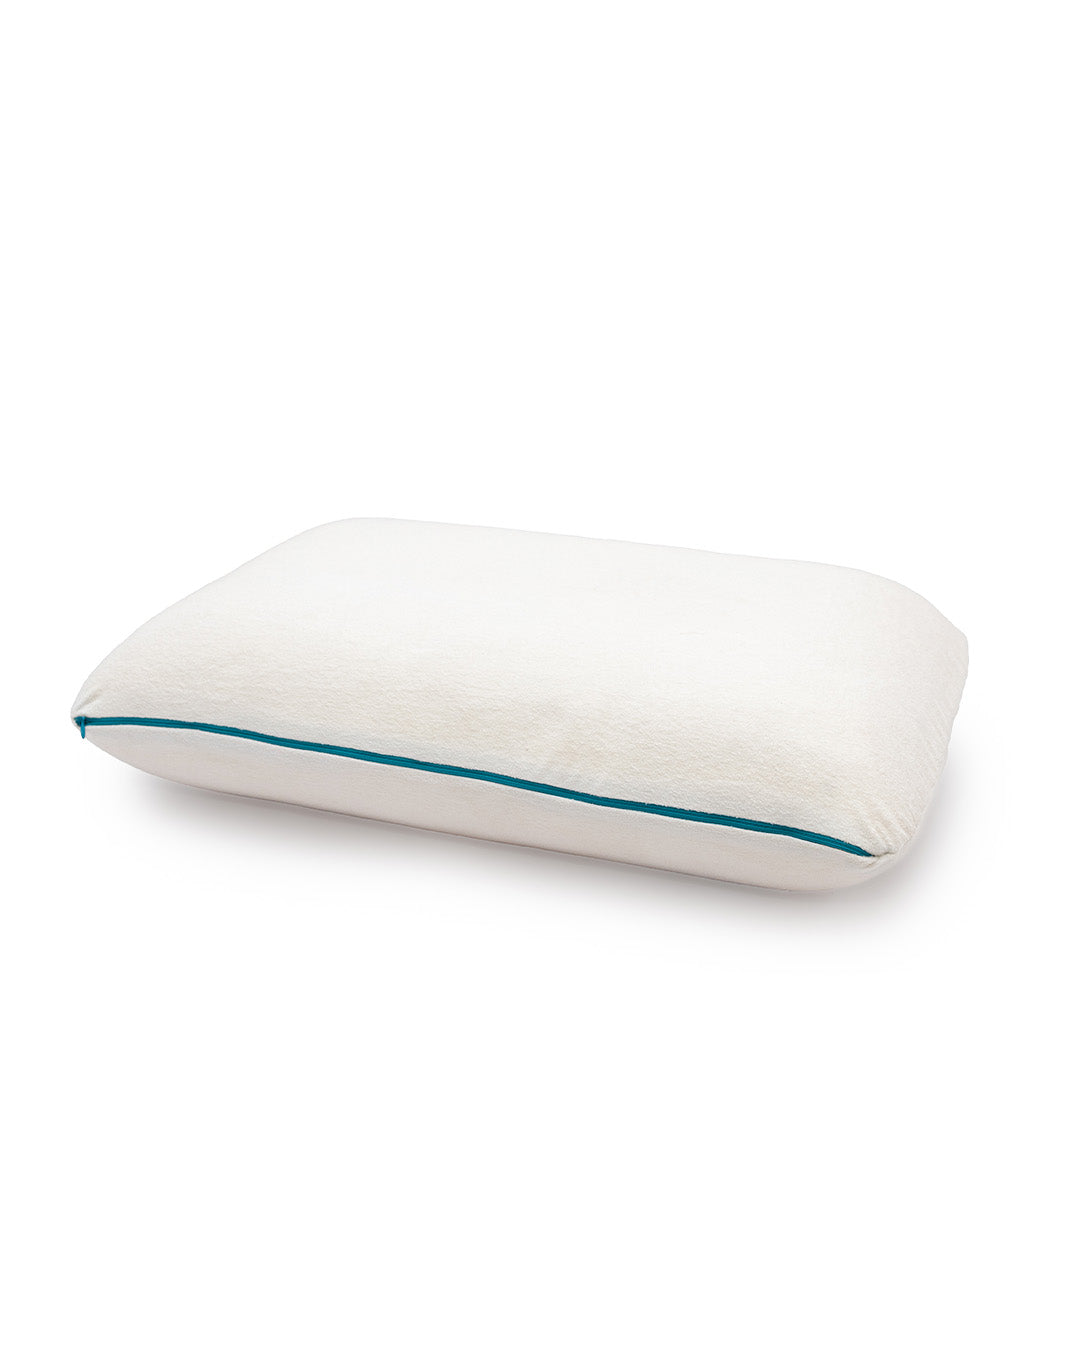 Classic Latex Pillow with holes